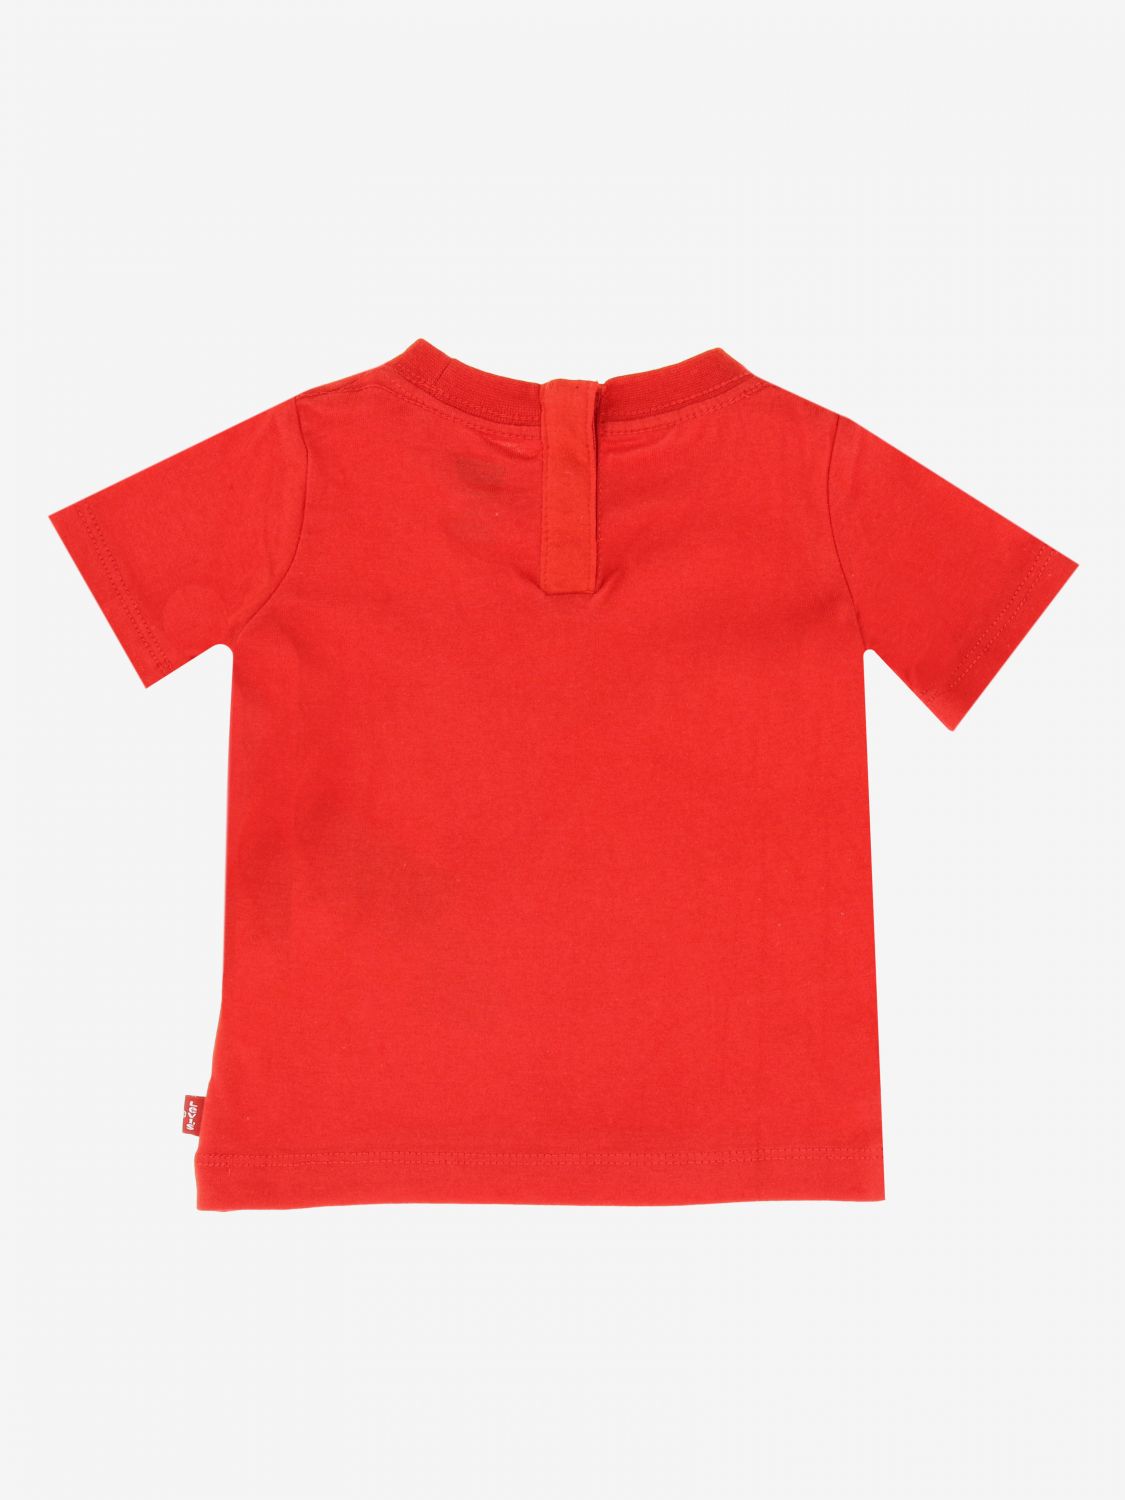 levis red t shirt